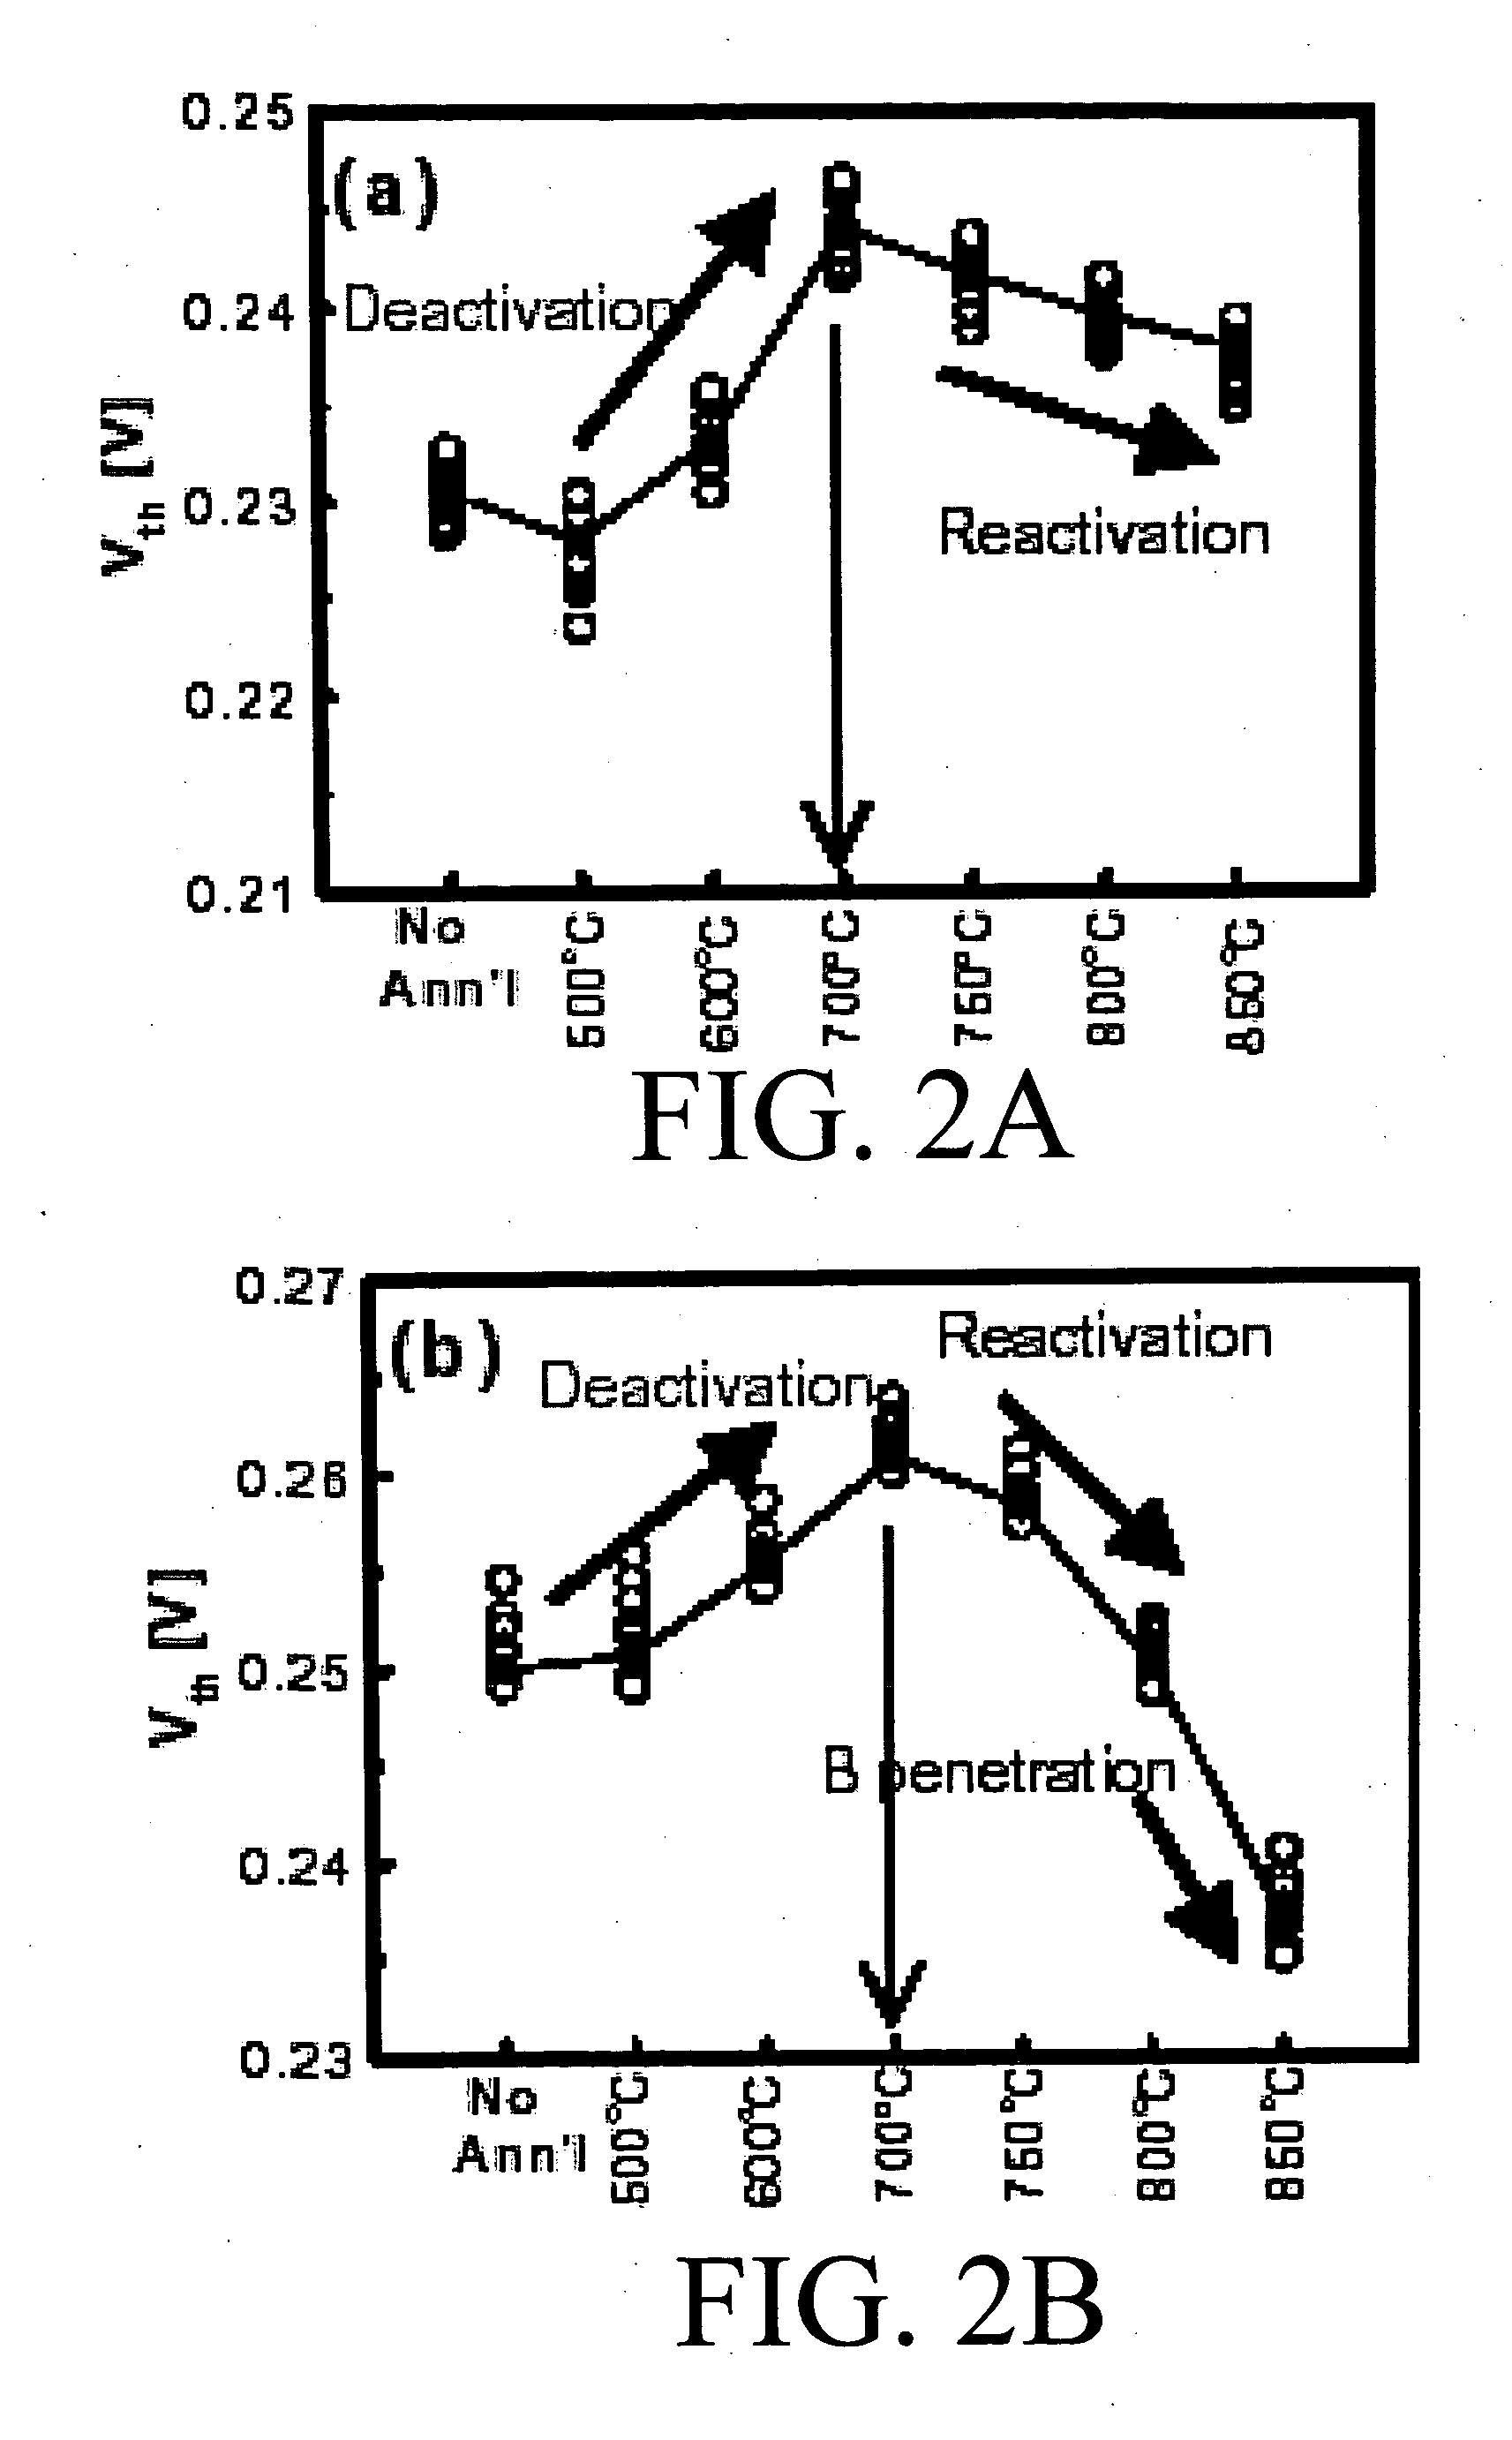 Nickel salicide process with reduced dopant deactivation